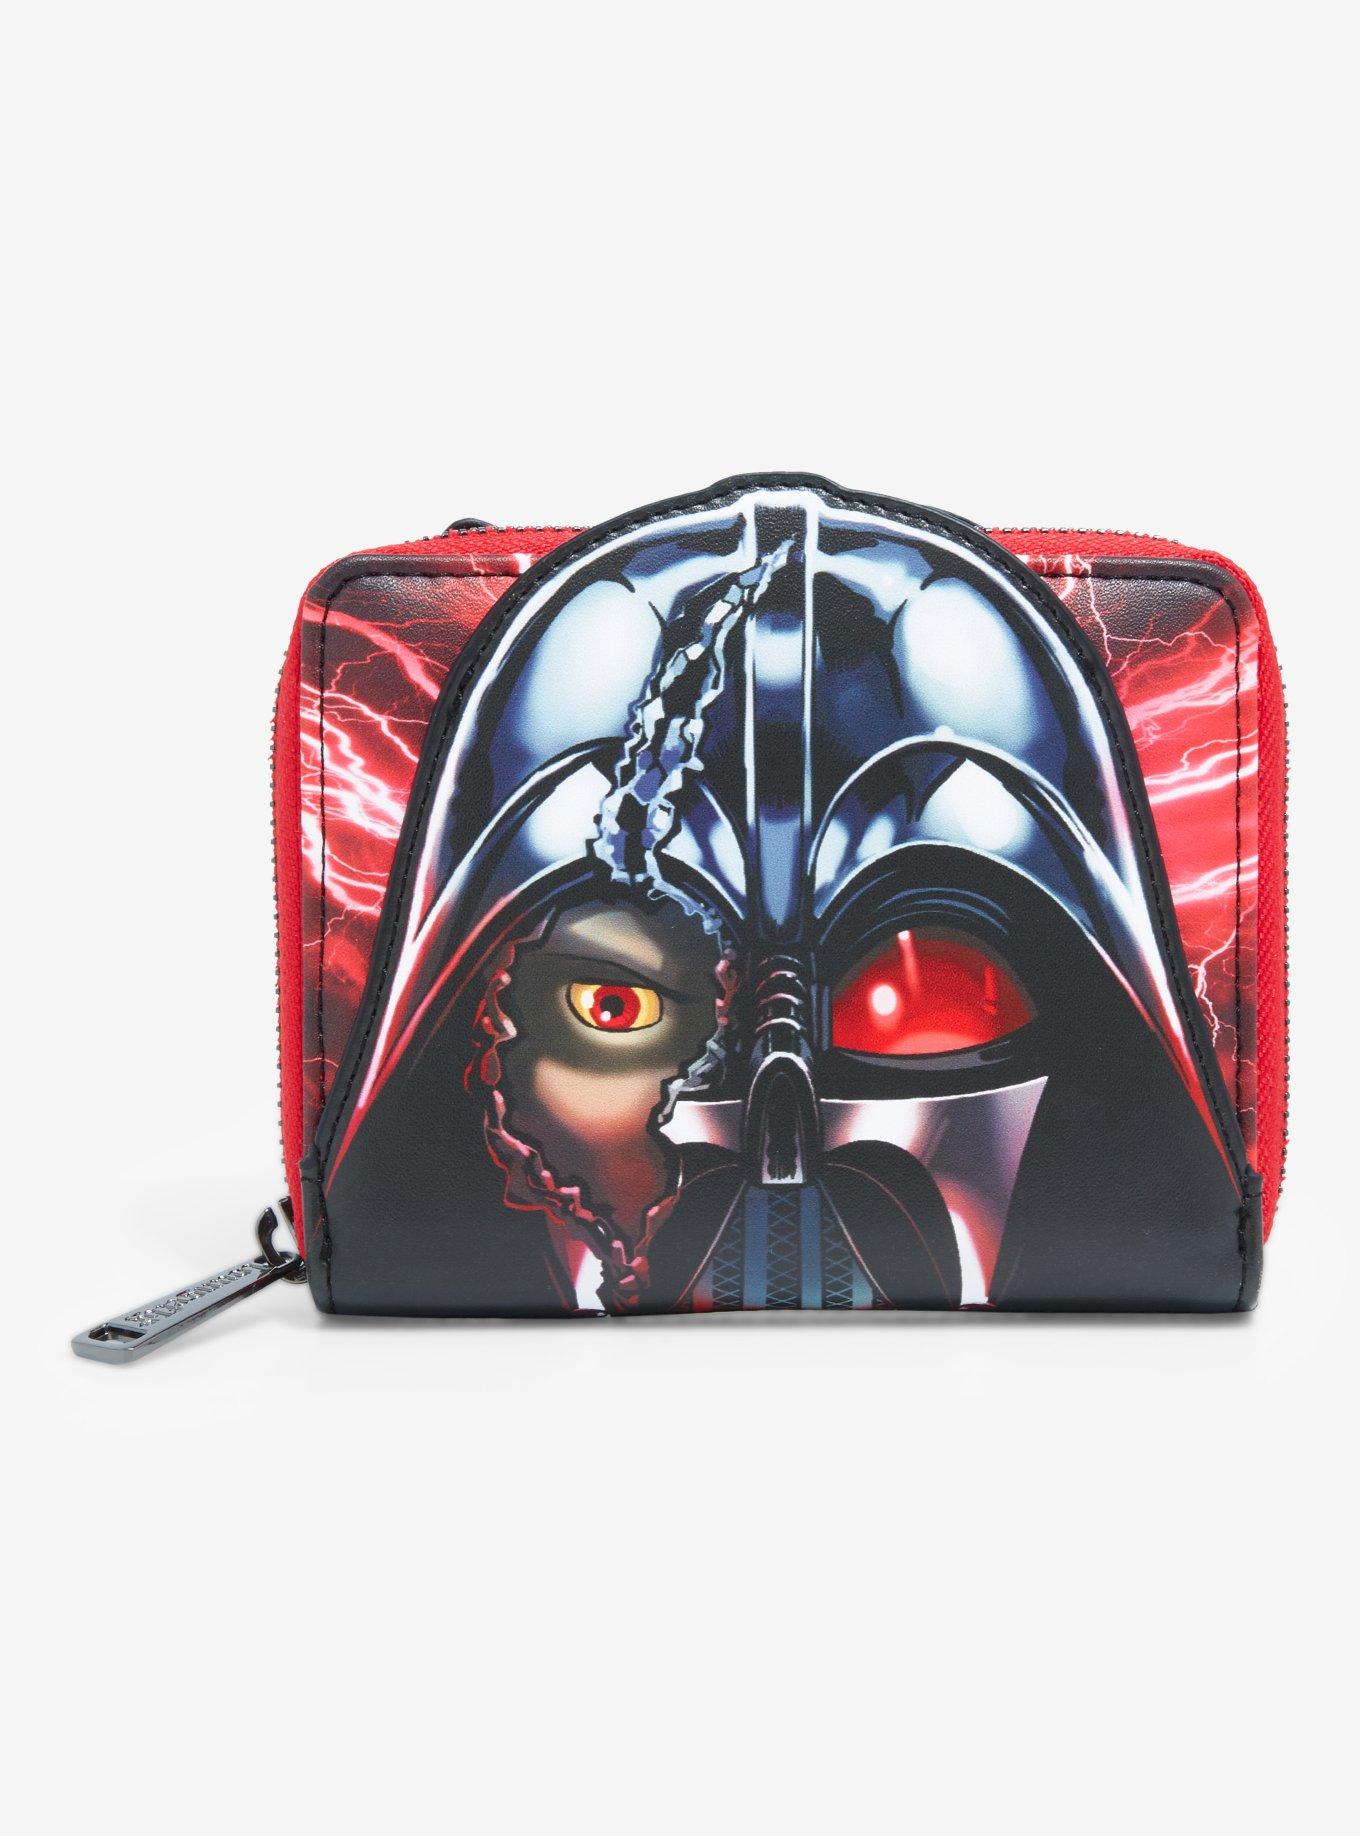 Star Wars Character Single Zipper Red Pencil Case